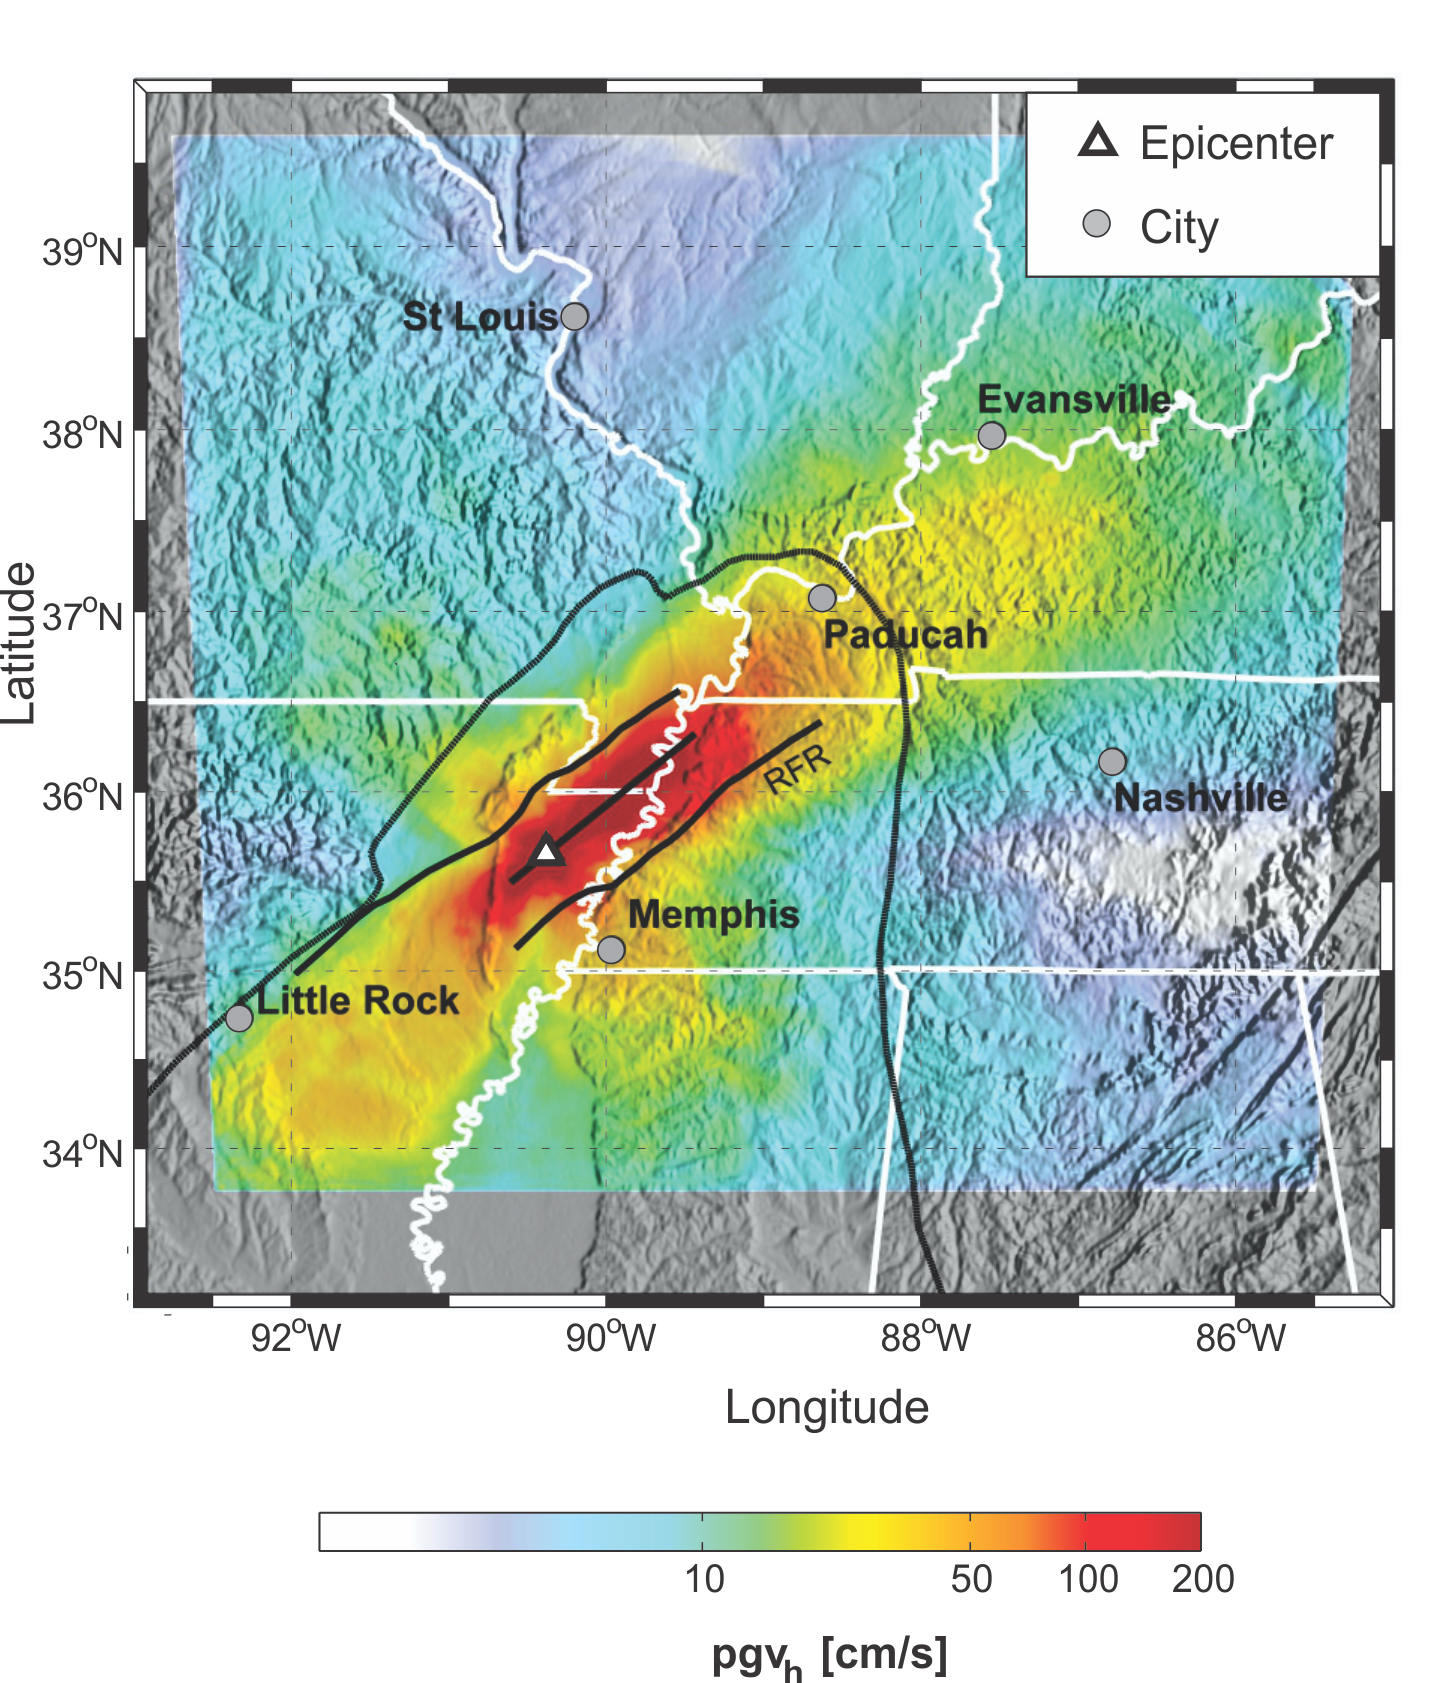 New Madrid earthquake simulations show strong, prolonged shaking in